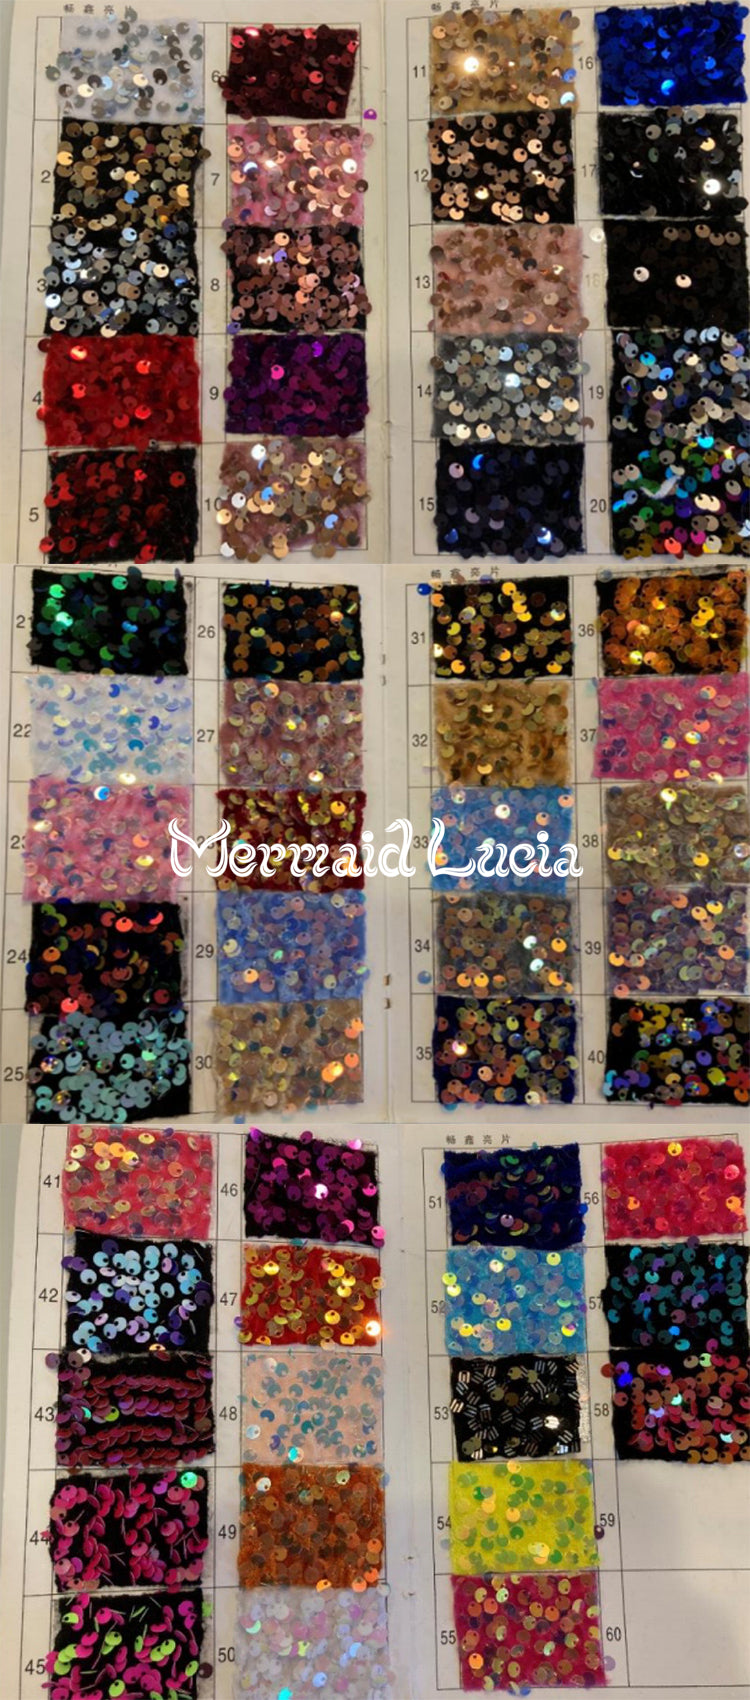 Mermaid Small Sequin Tail Color 13 Red Golden